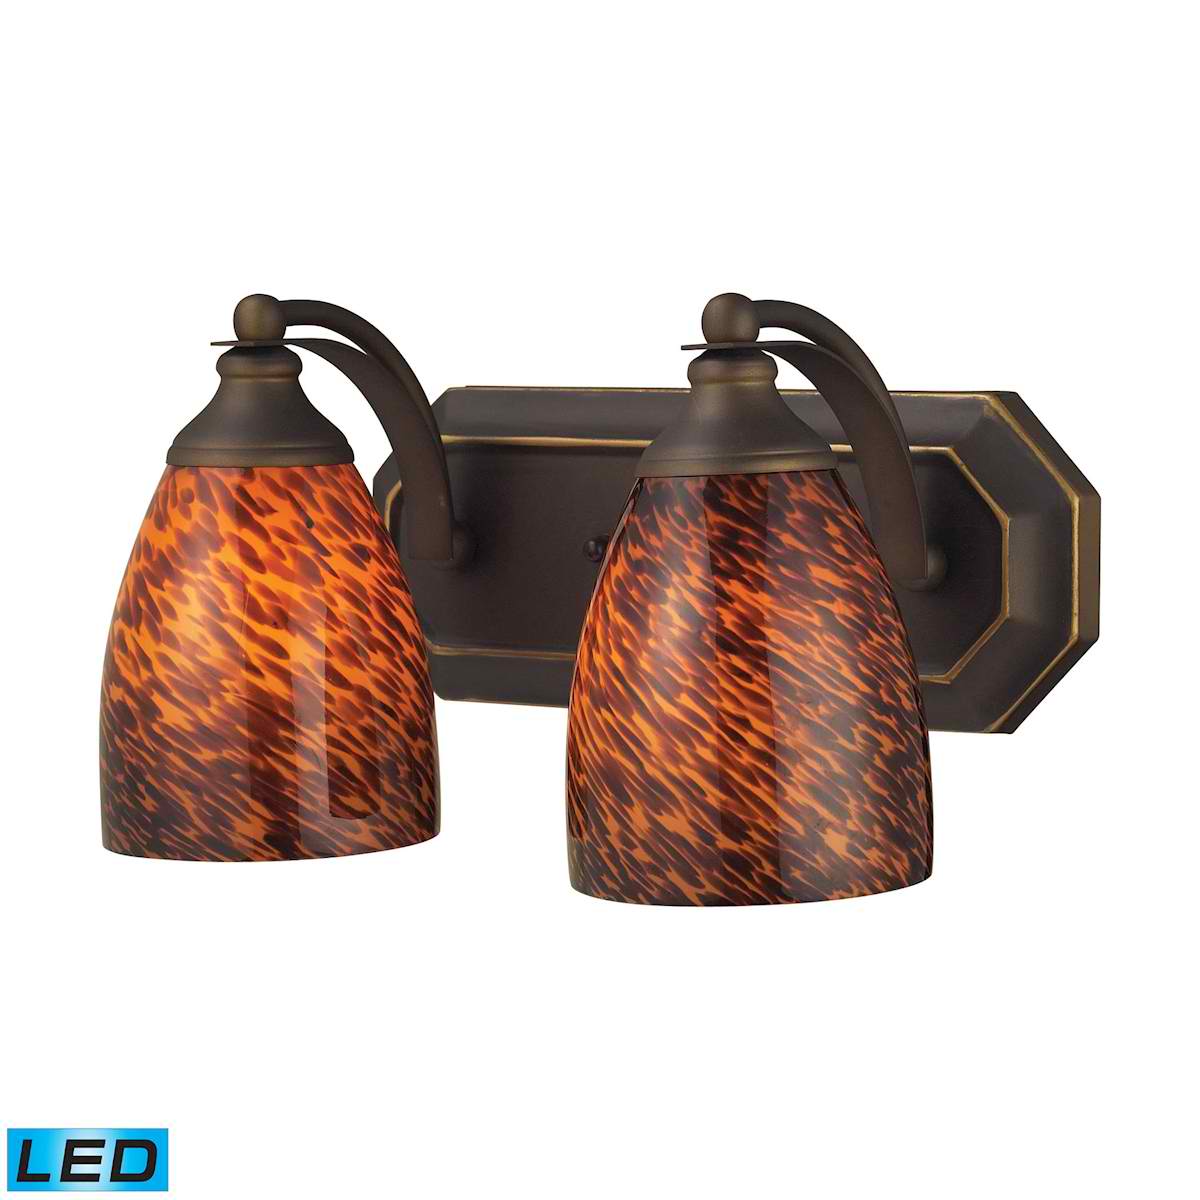 2 Light Vanity in Aged Bronze and Espresso Glass - LED, 800 Lumens (1600 Lumens Total) with Full Scale